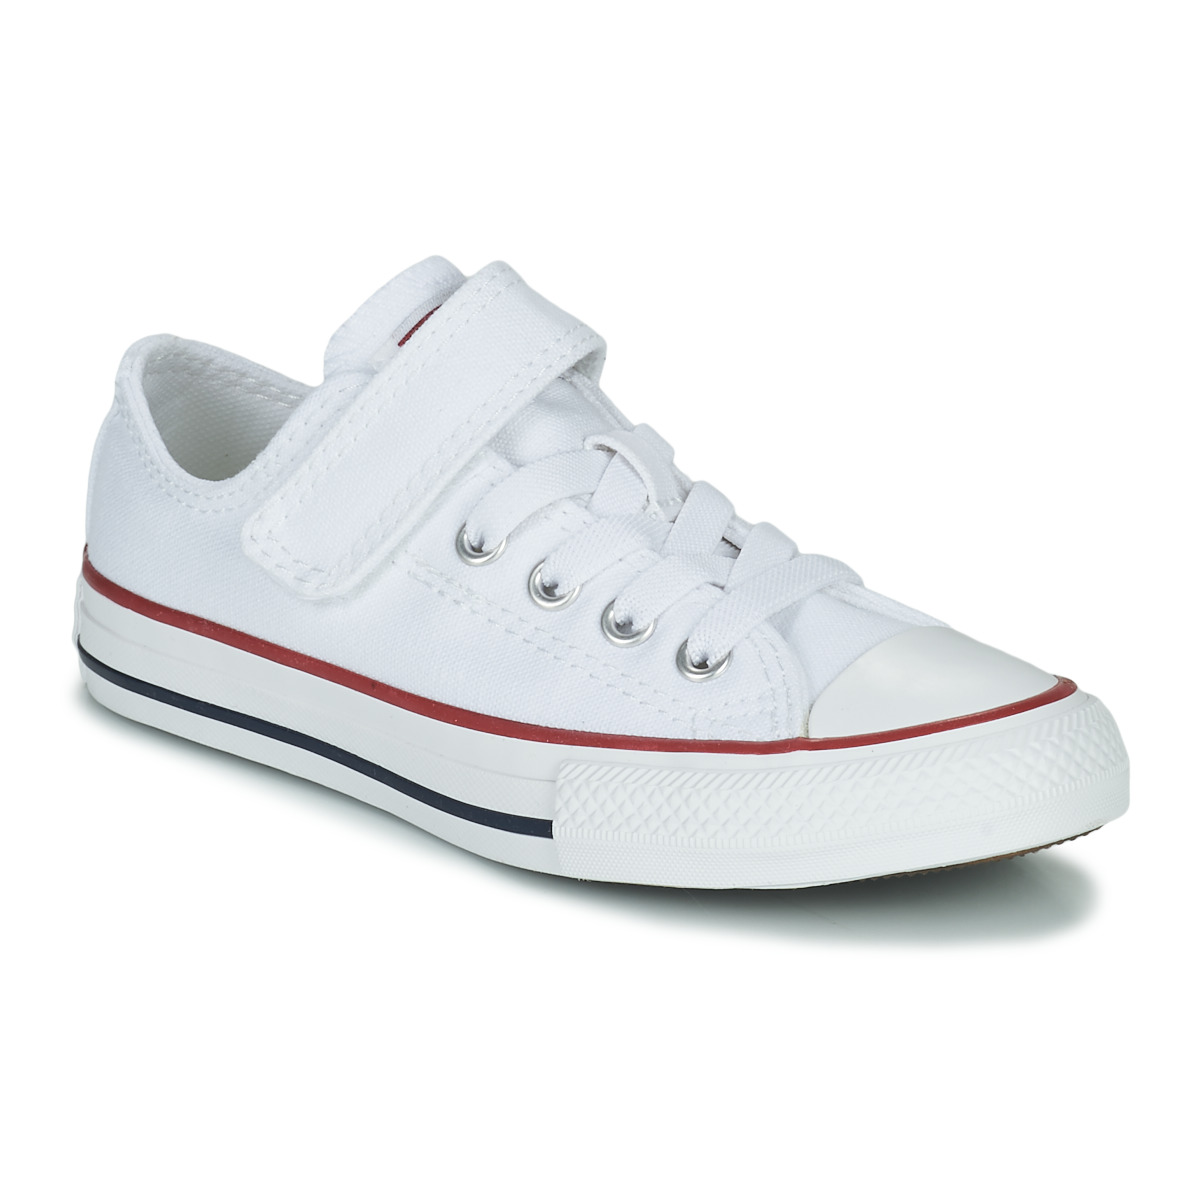 Chaussures Enfant Baskets basses Converse Chuck Taylor All Star 1V Foundation Ox 